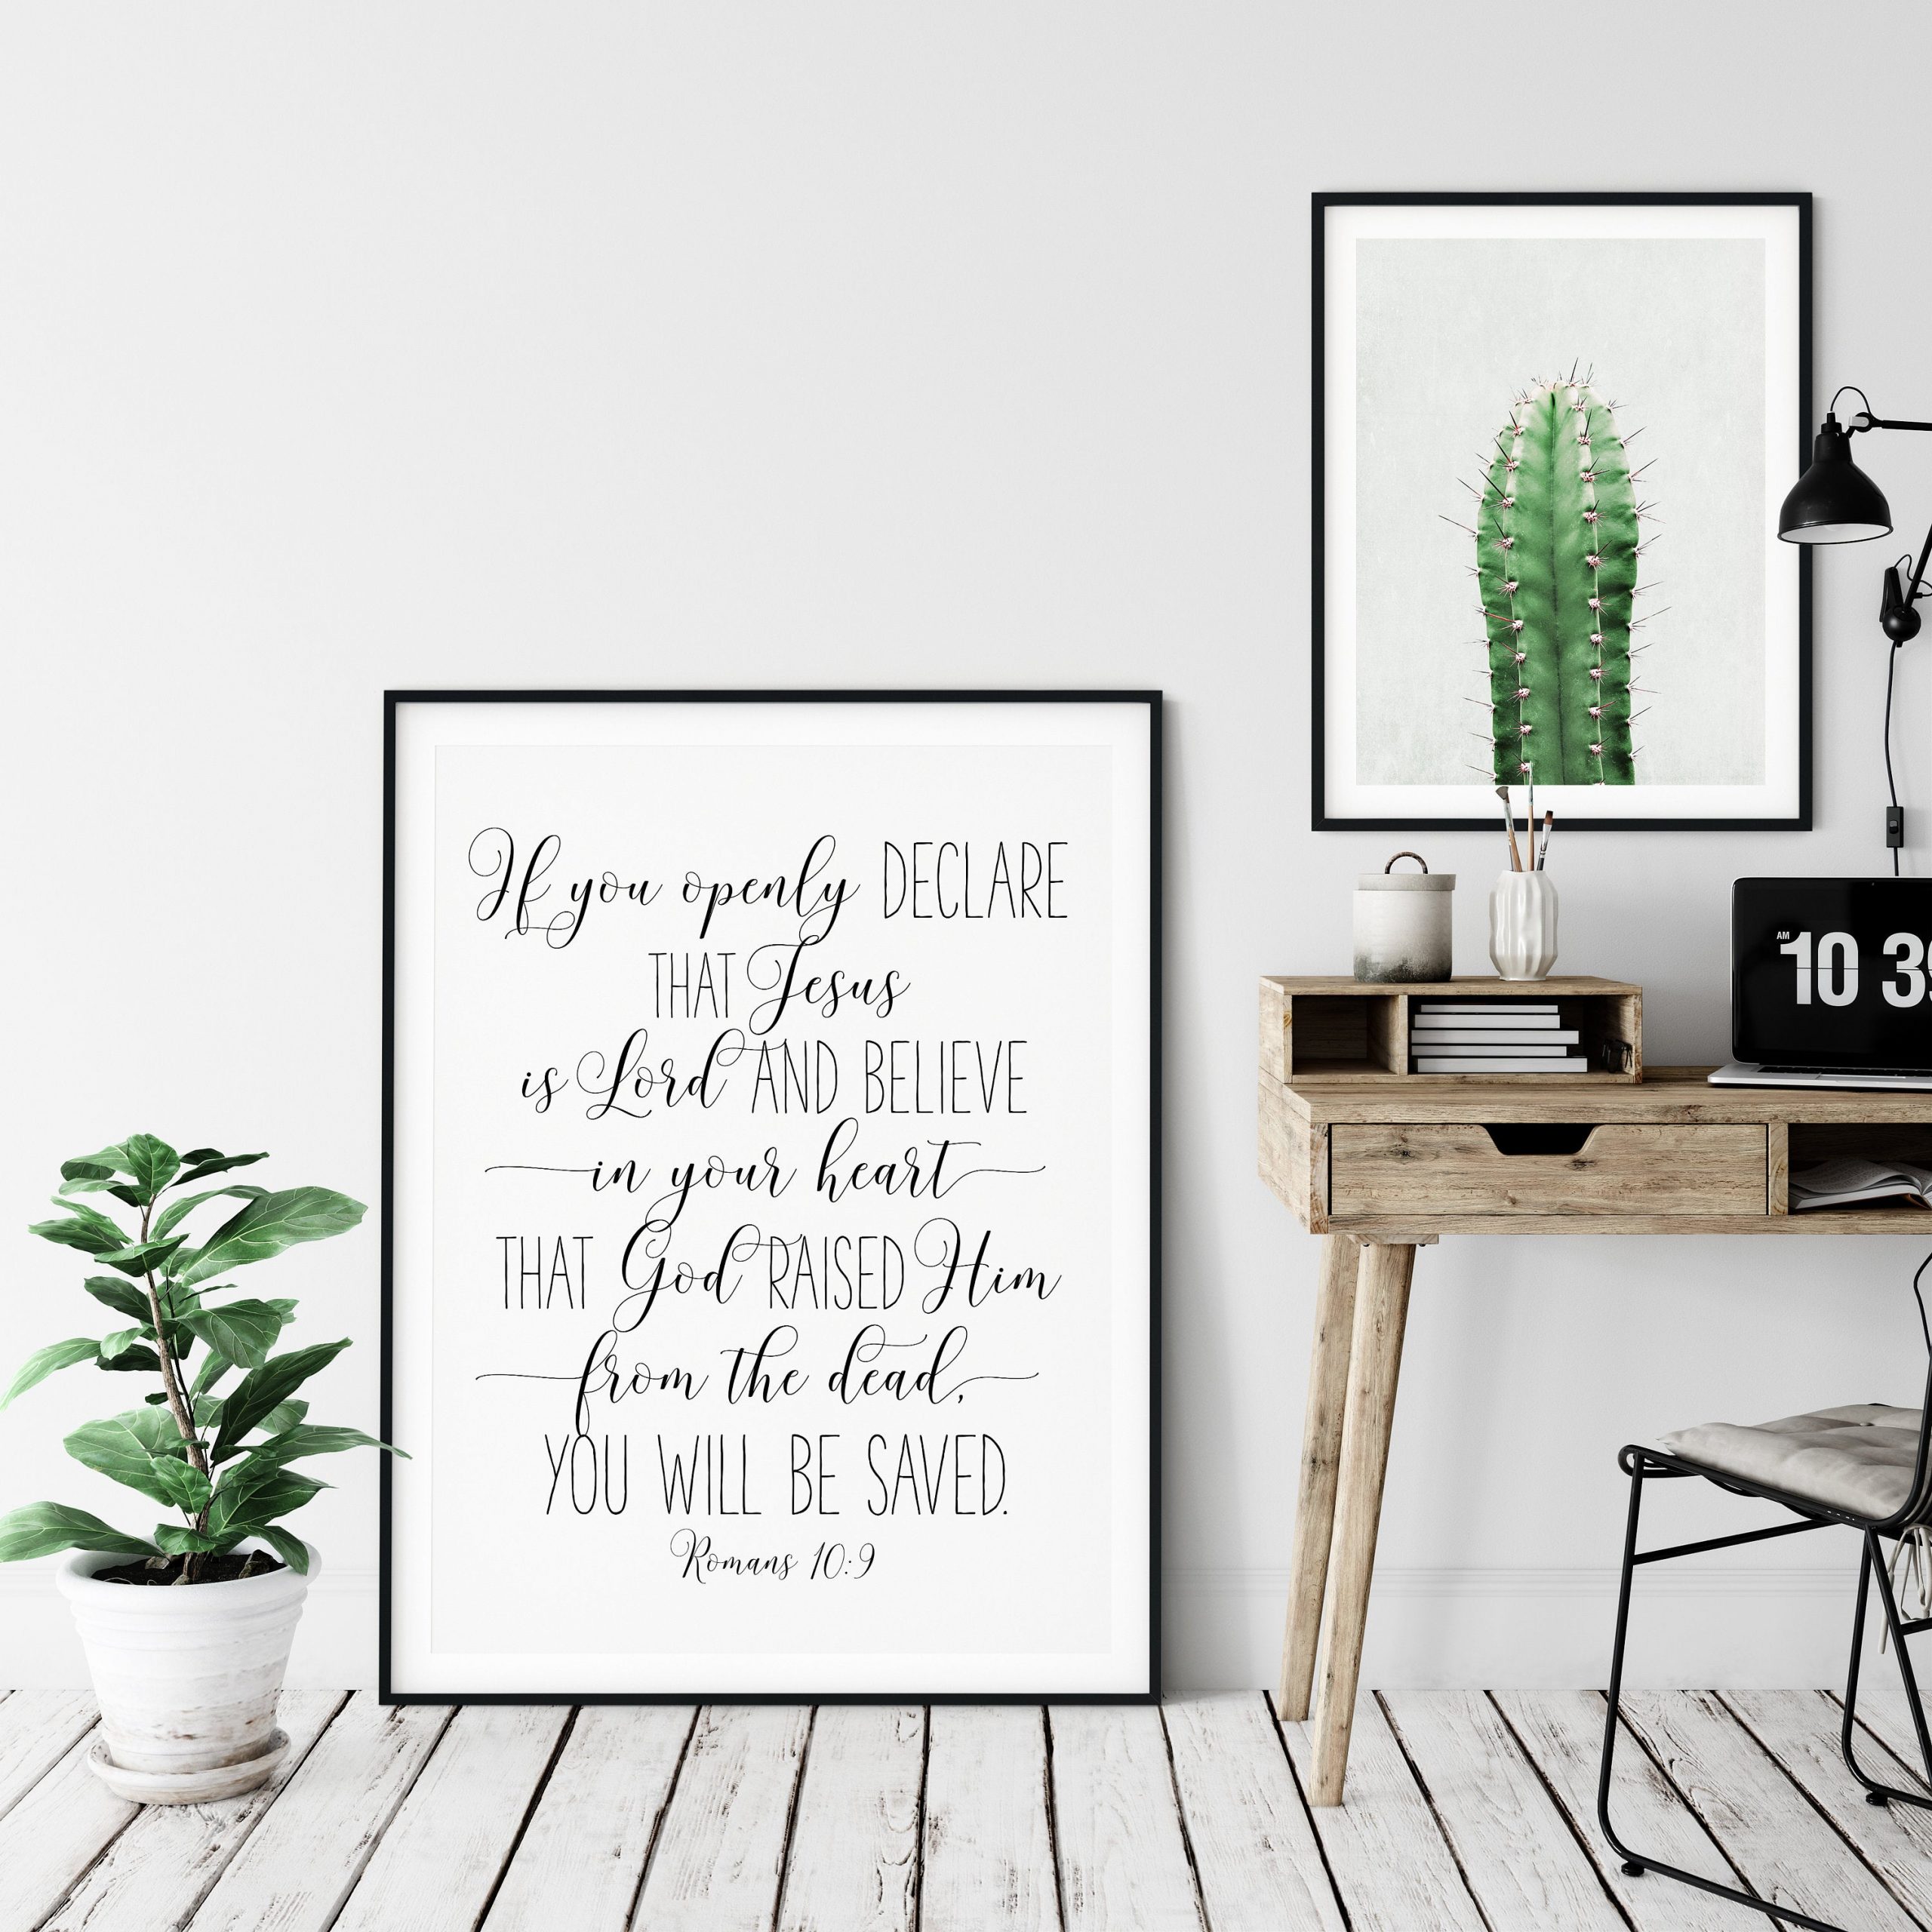 You Will Be Saved, Romans 10:9, Bible Verse Printable Wall Art, Christian Gifts, Nursery Decor